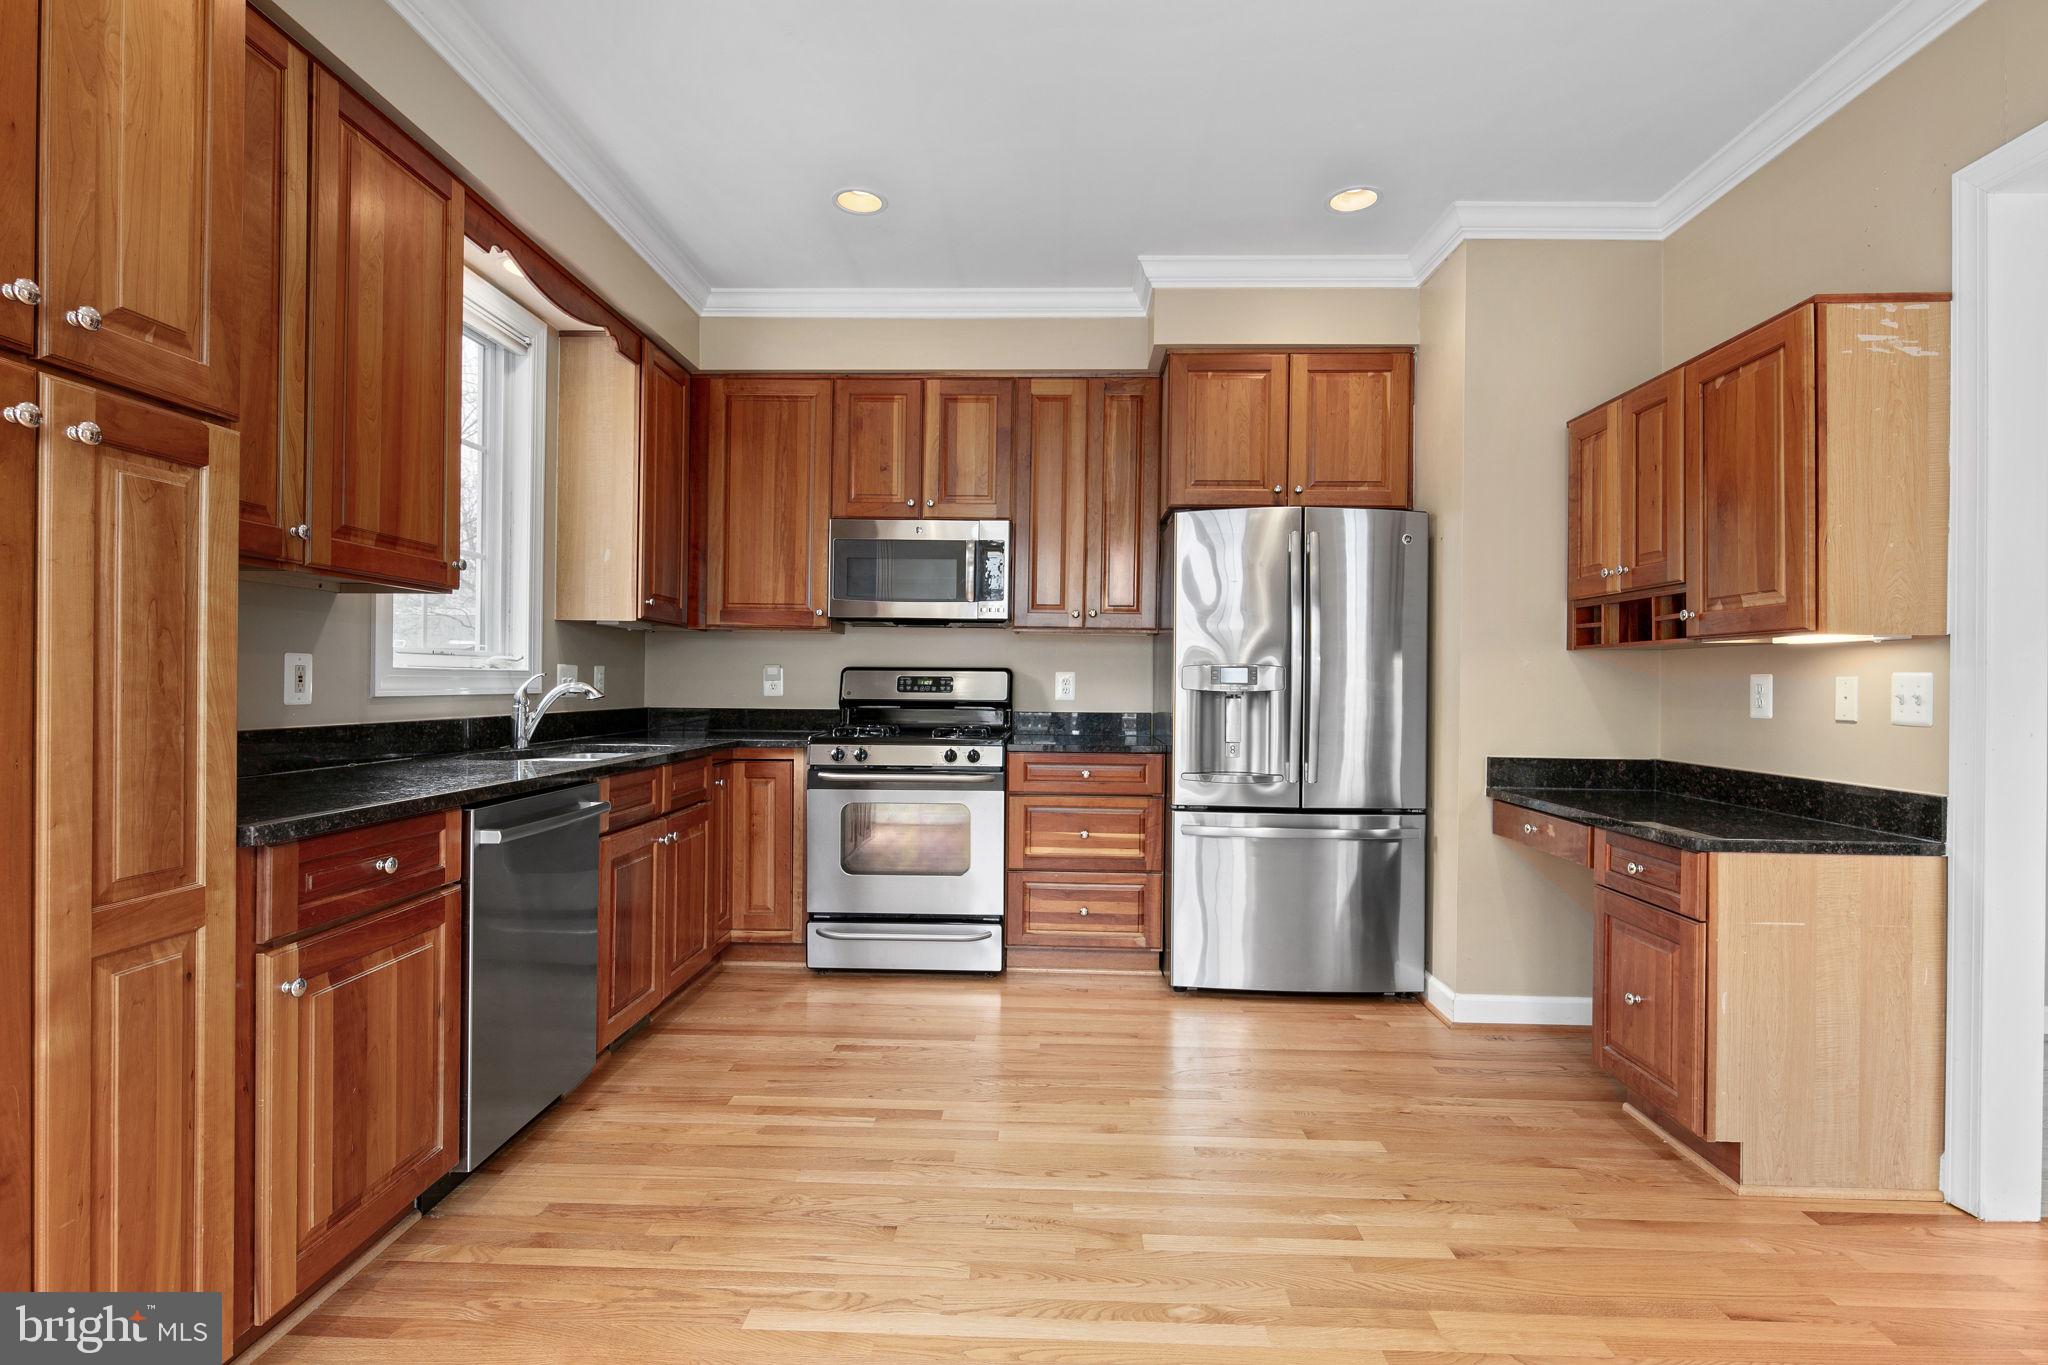 a kitchen with stainless steel appliances granite countertop a refrigerator microwave and sink